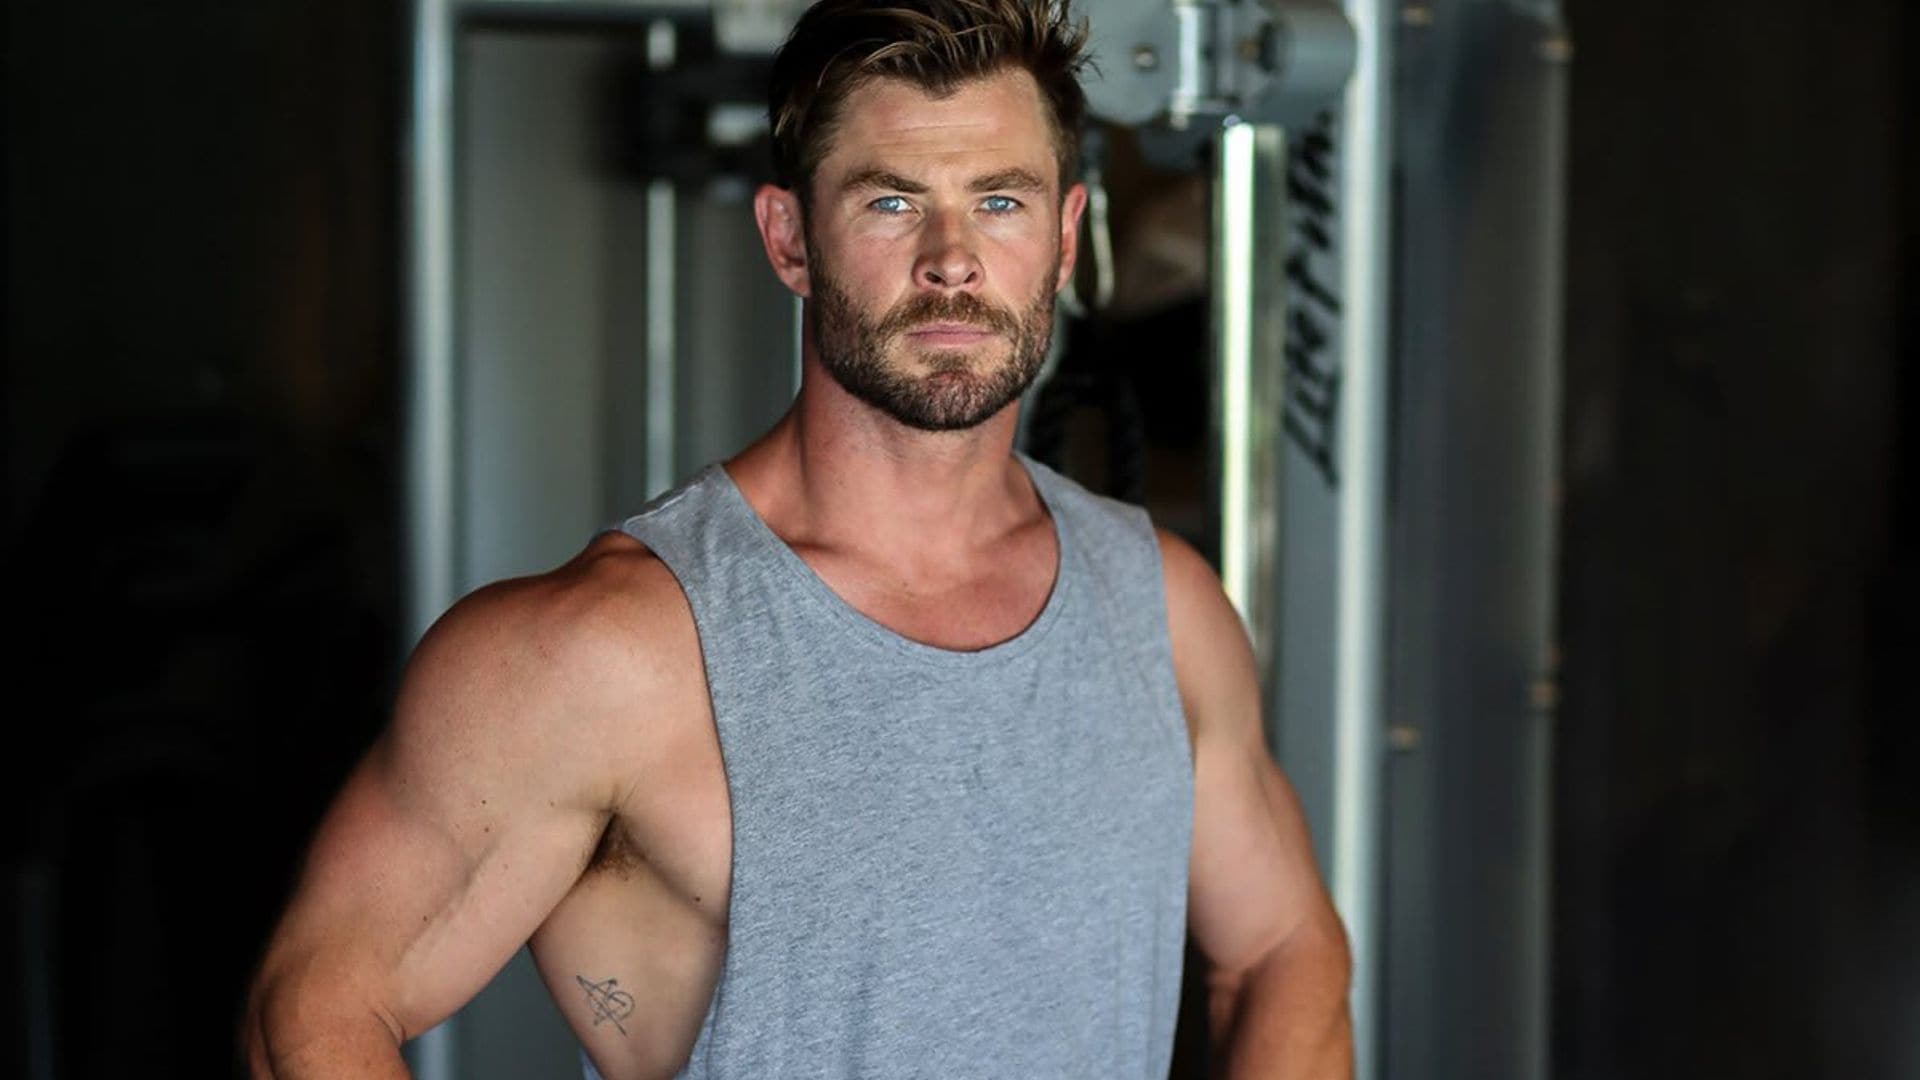 Chris Hemsworth wants to give you a lifetime opportunity to reach your fitness goals with Centr